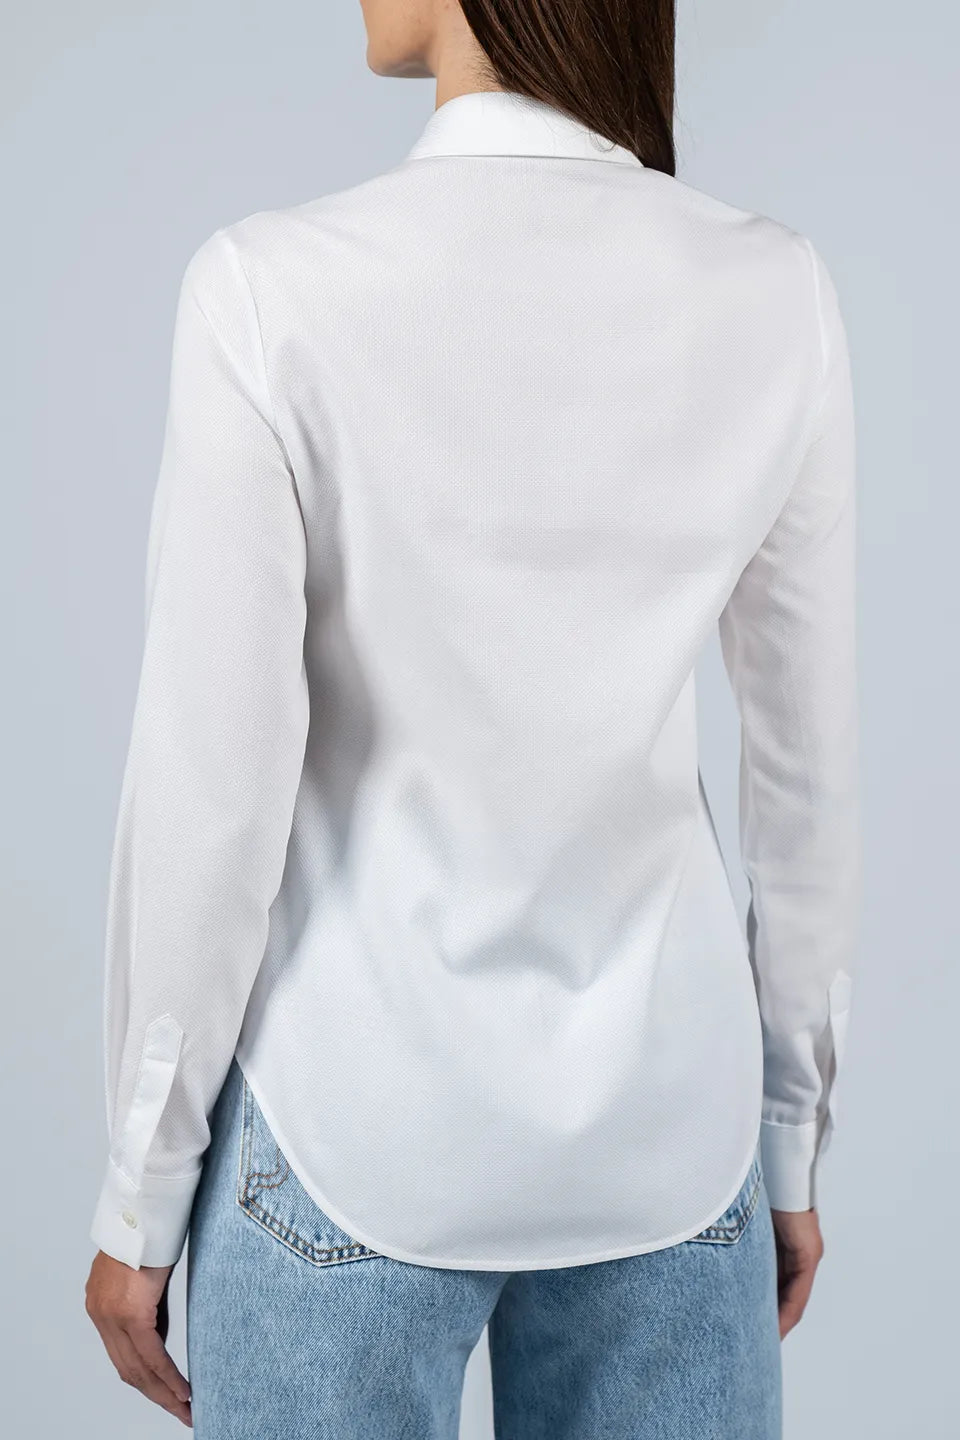 Designer White Shirt, shop online with free delivery in UAE. Product gallery 3